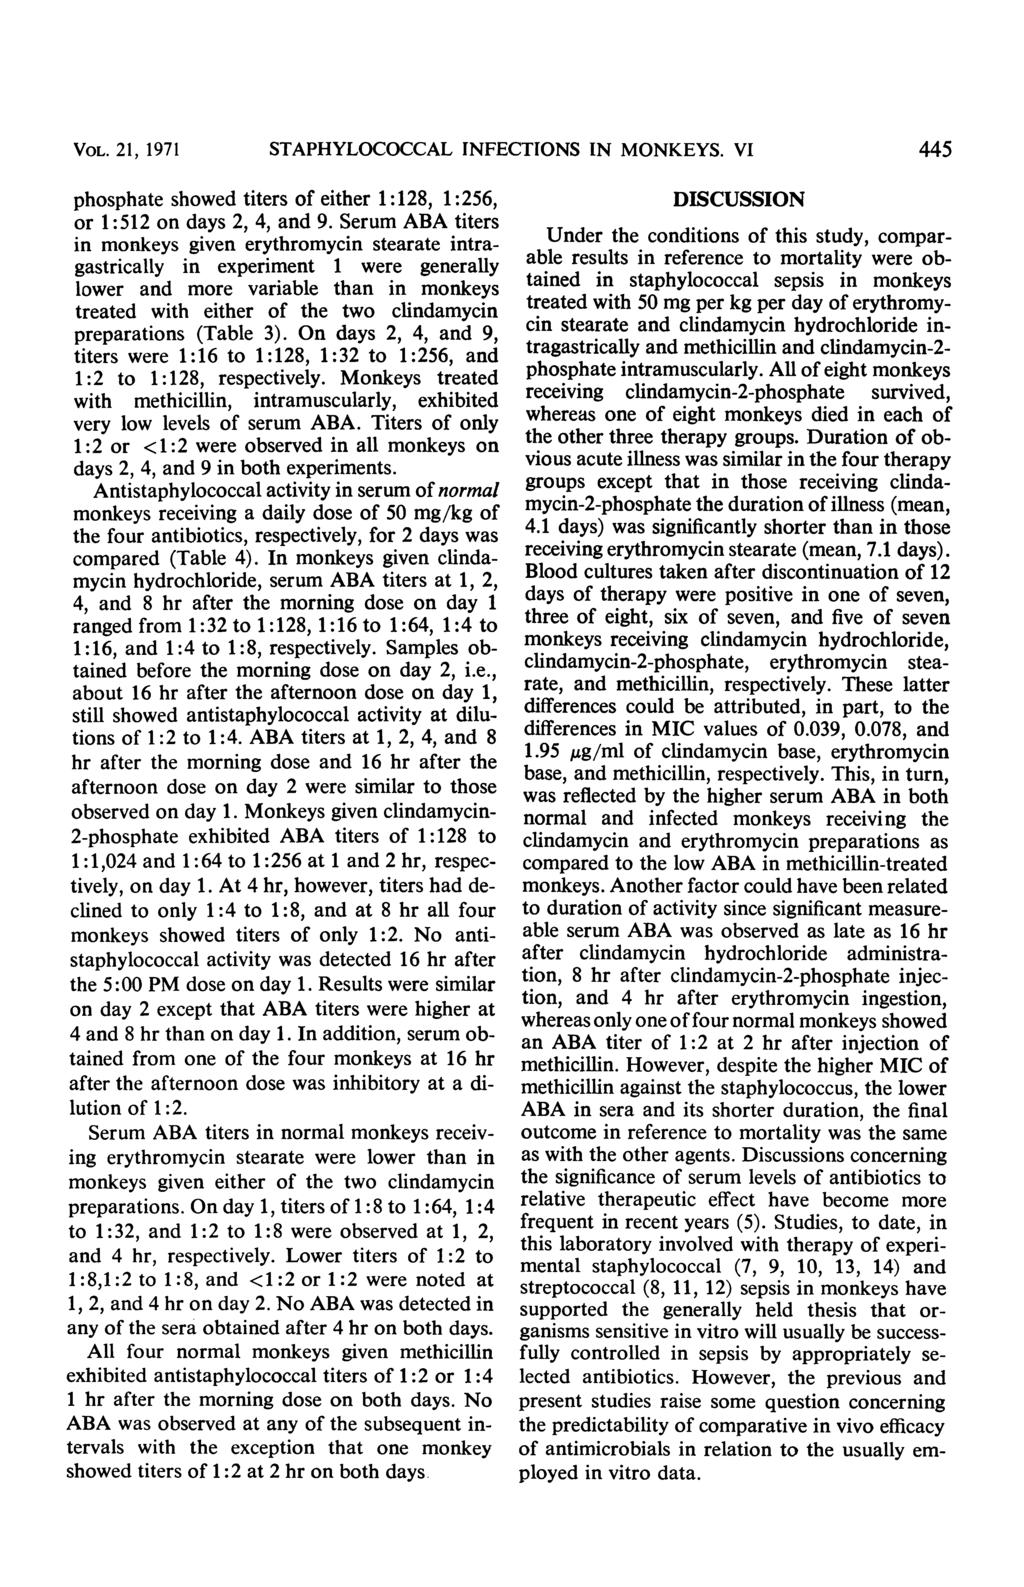 VOL. 21, 1971 STAPHYLOCOCCAL INFECTIONS IN MONKEYS. VI 445 phosphate showed titers of either 1:128, 1:256, or 1:512 on days 2, 4, and 9.